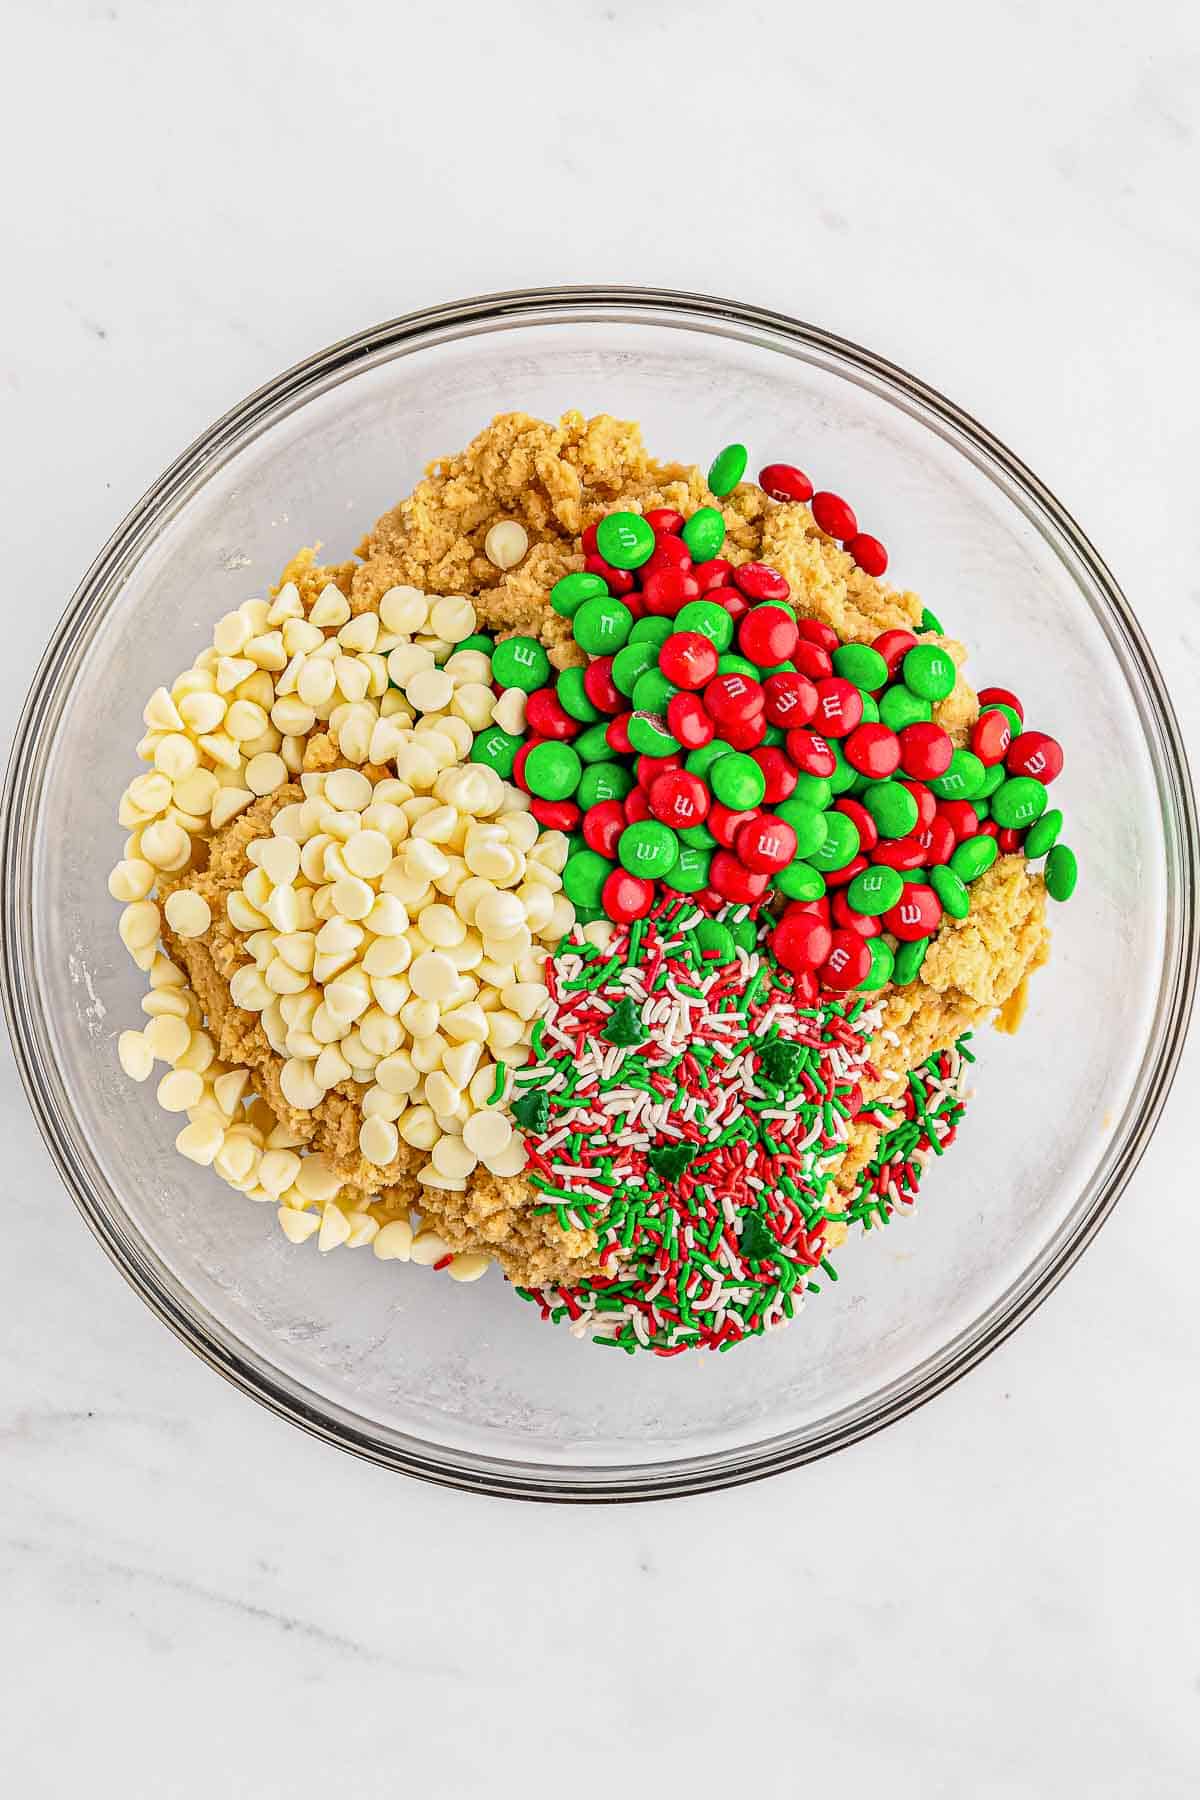 A glass bowl filled with cookie dough ingredients with m&m's, white chocolate chips and sprinkles.